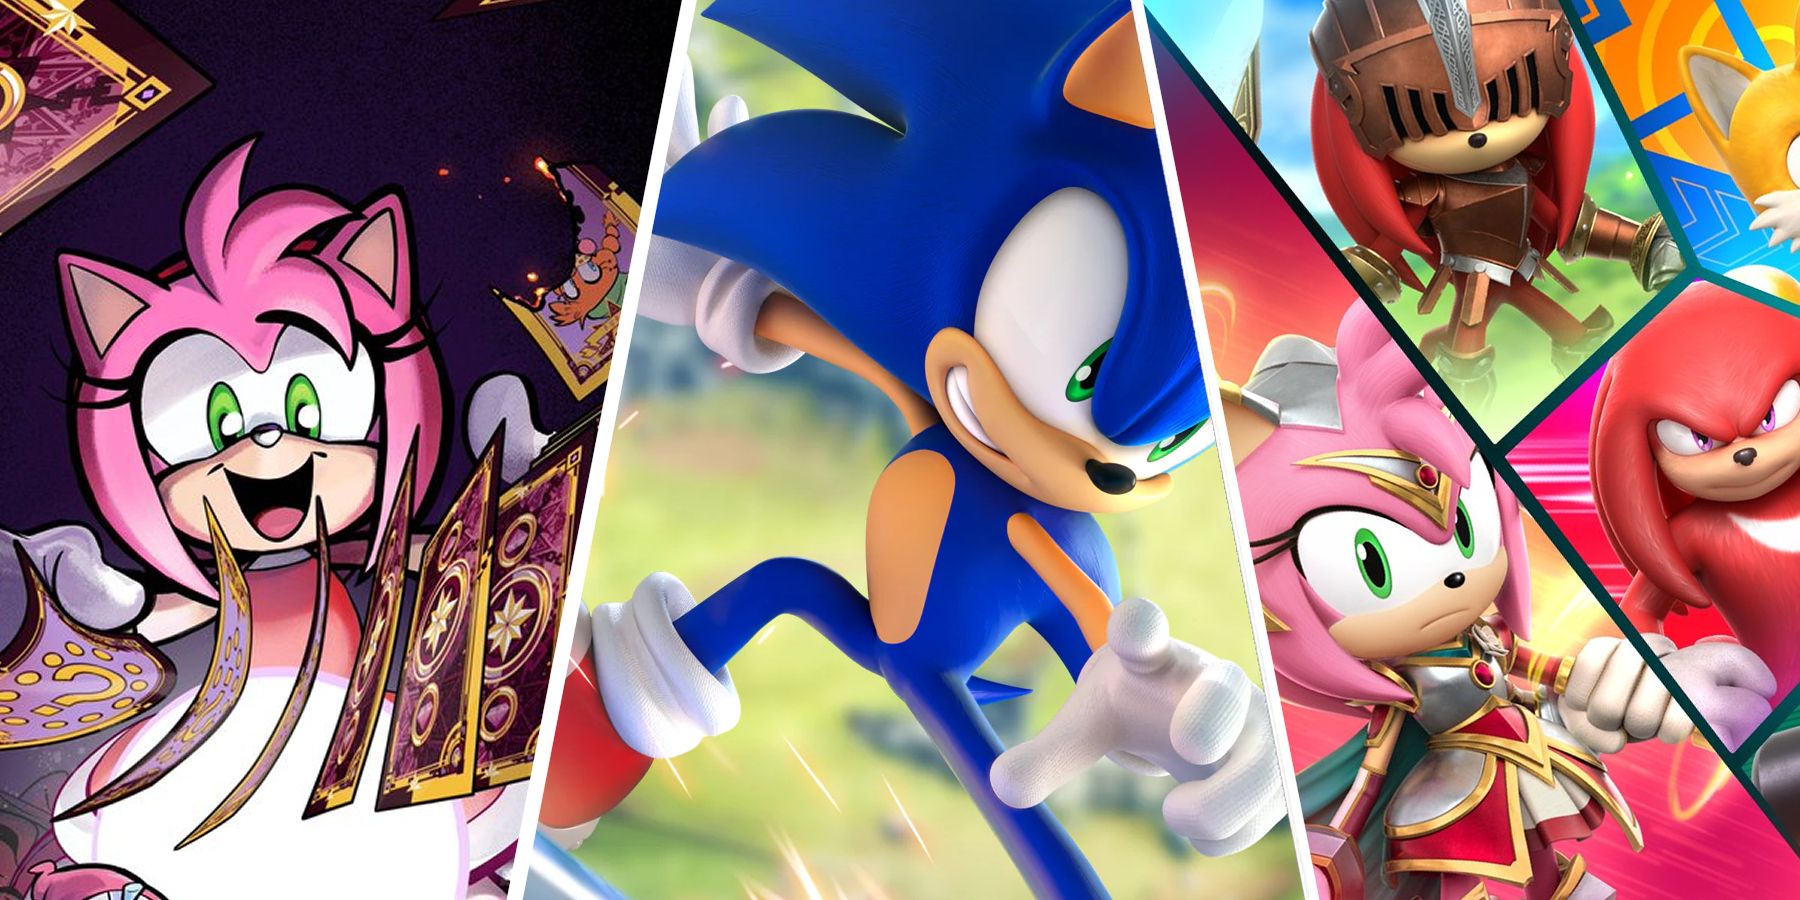 What to Expect From the Sonic Franchise in 2023